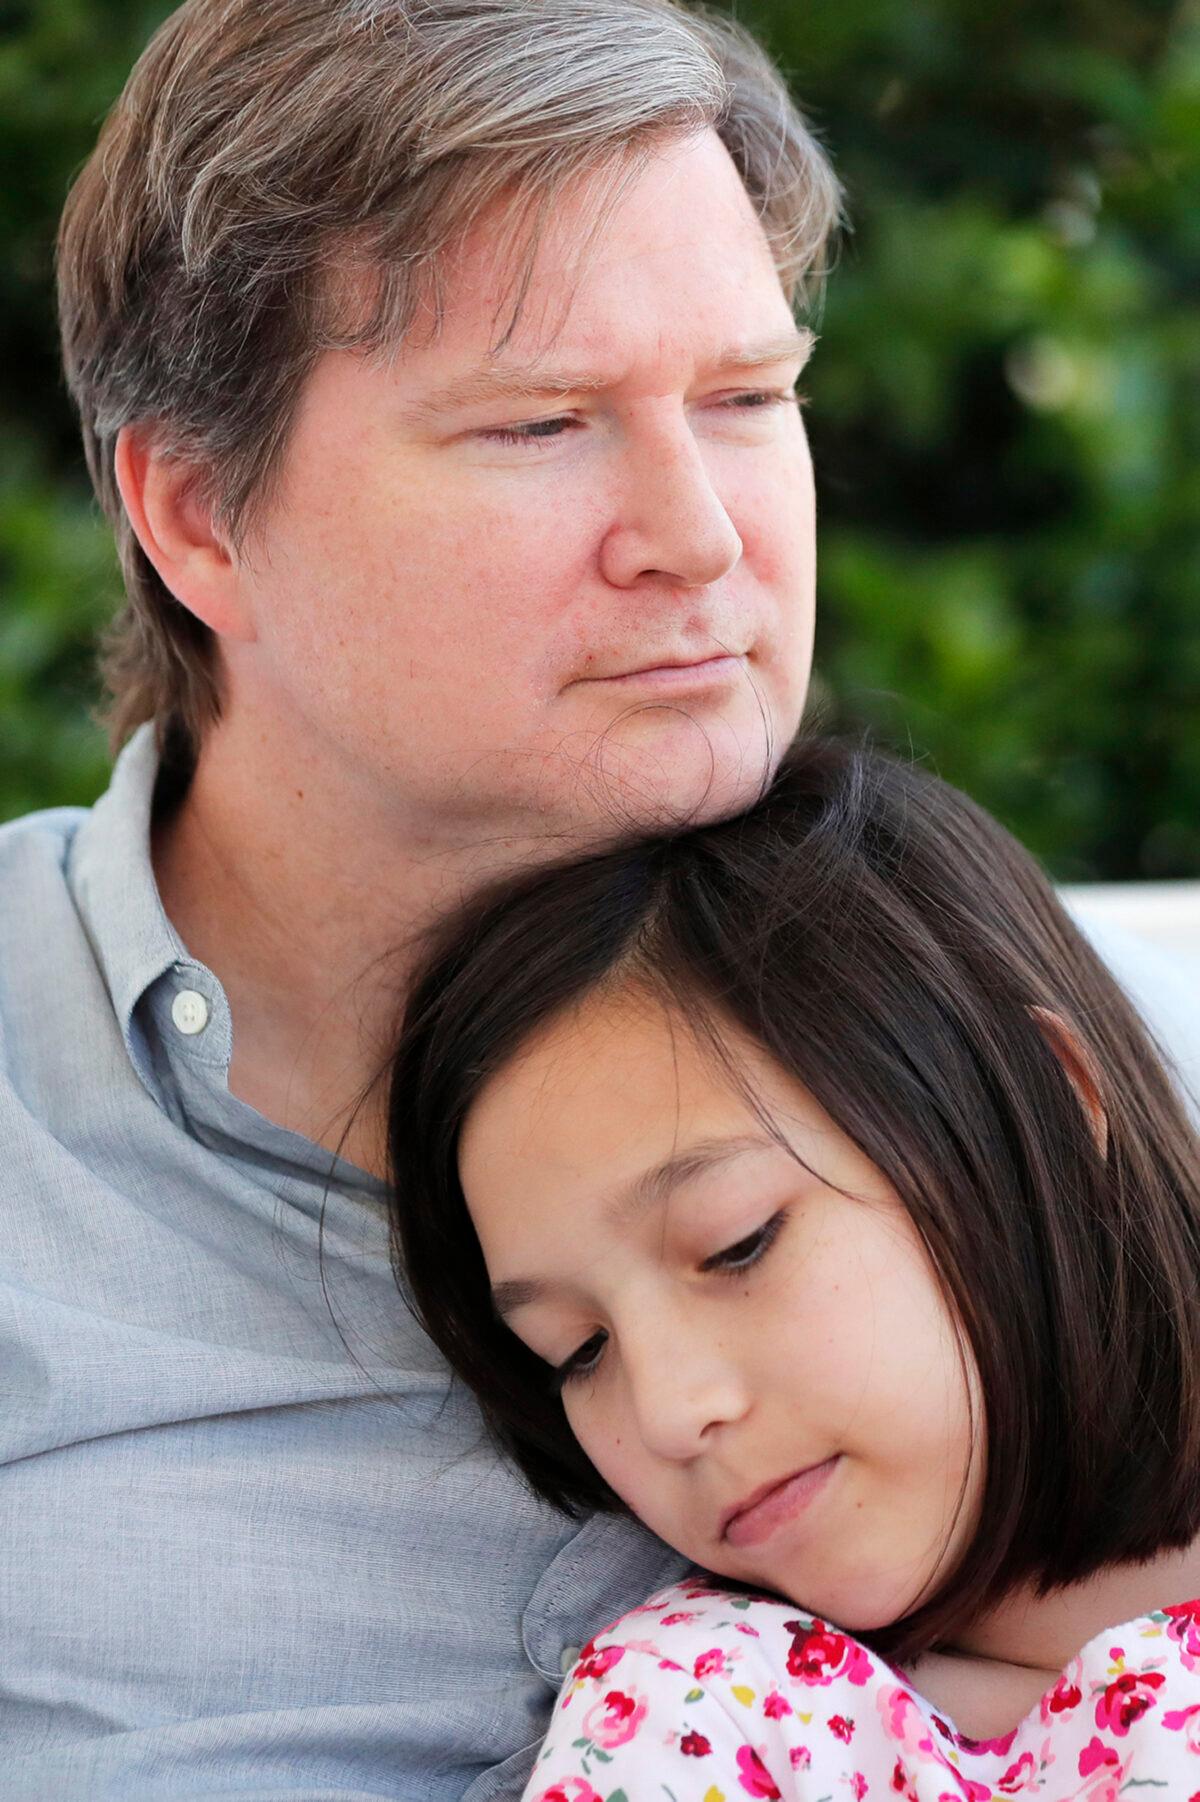 Juliet Daly, 12, sits with her father Sean Daly on the front porch of their family home in Covington, La., on April 30, 2020. (Gerald Herbert/AP Photo)